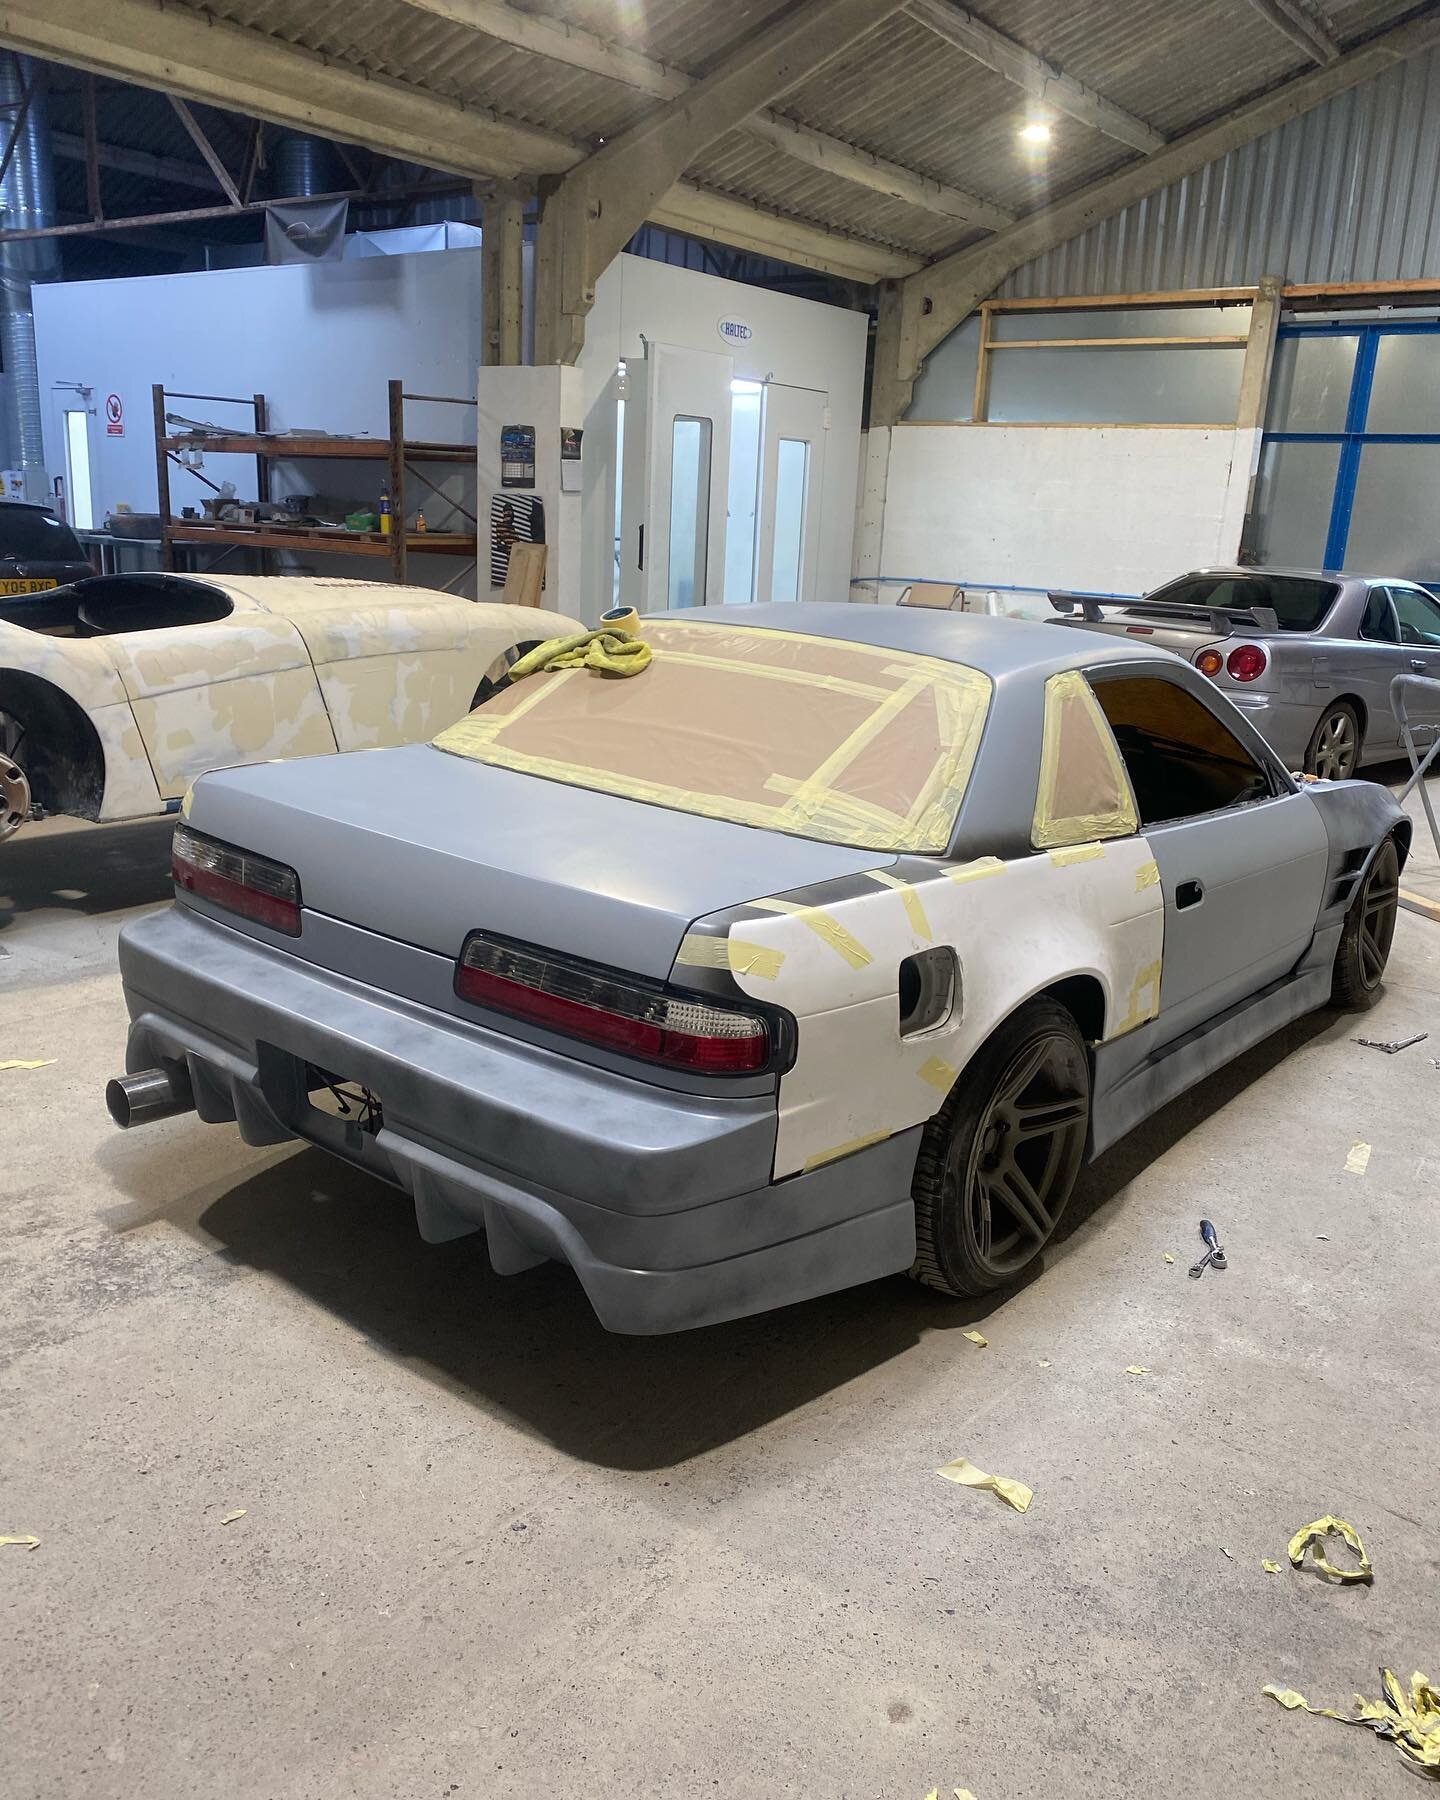 This is what dreams are made of&hellip;exited is an understatement @emerald_s14 

These photos capture our final panel fitment (minus splitters) before fitting the wide body rear arches on Lewis&rsquo;s PS13 assuring everything is exactly where it&rs